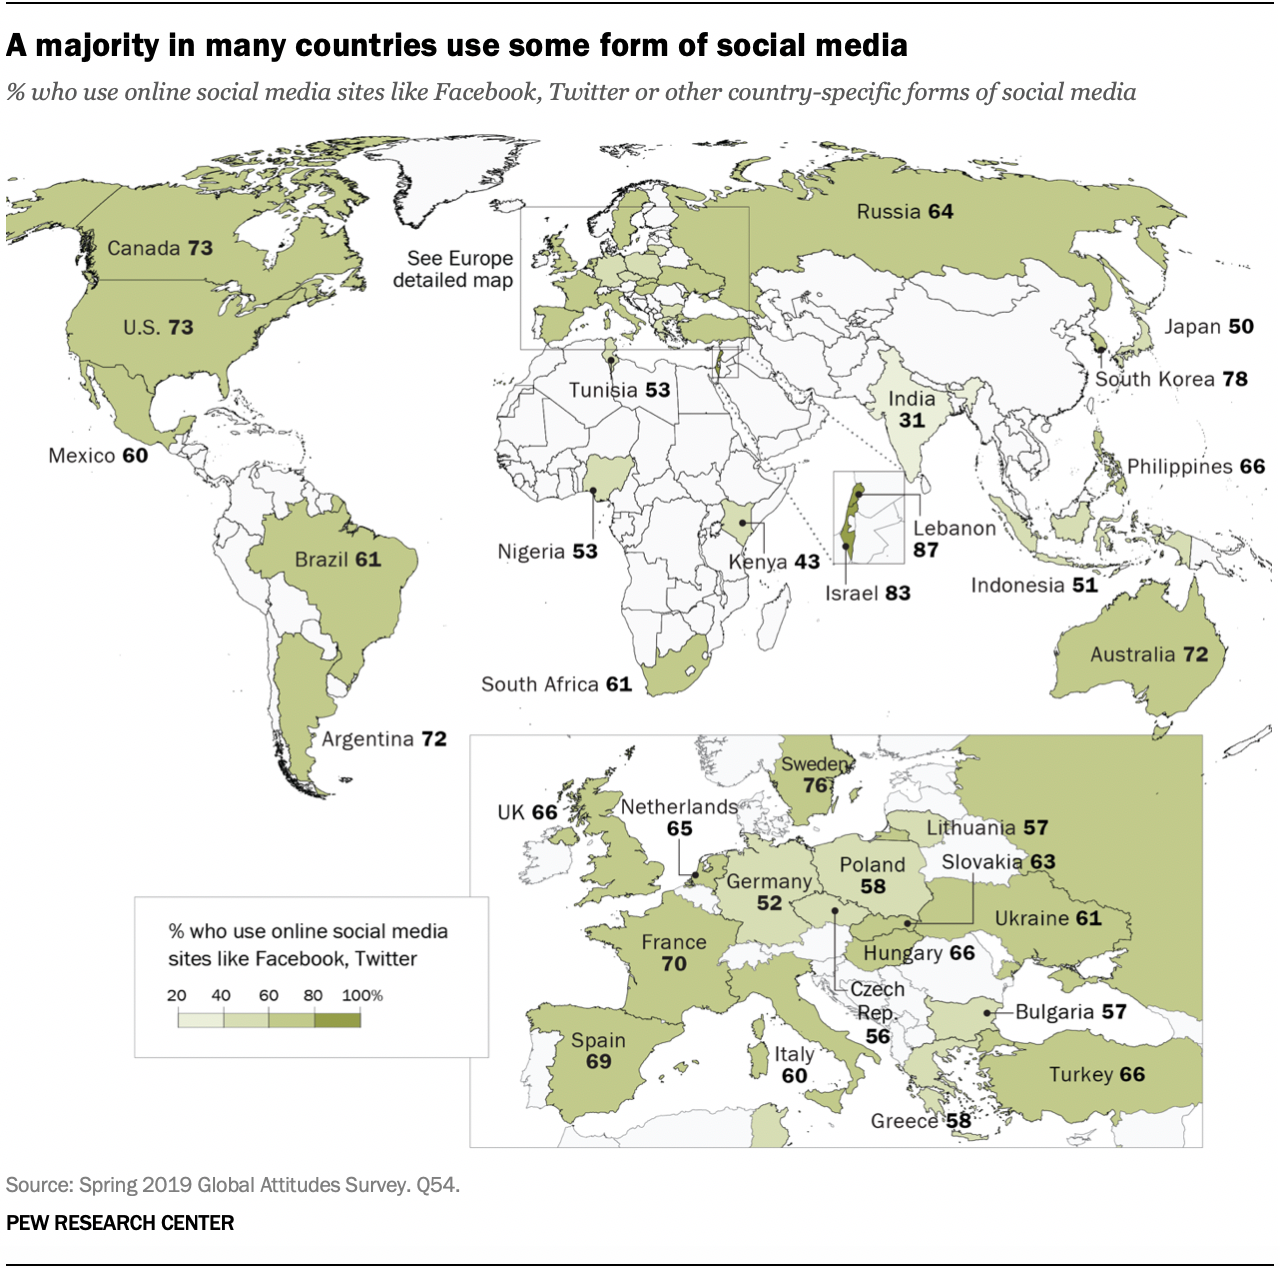 A majority in many countries use some form of social media